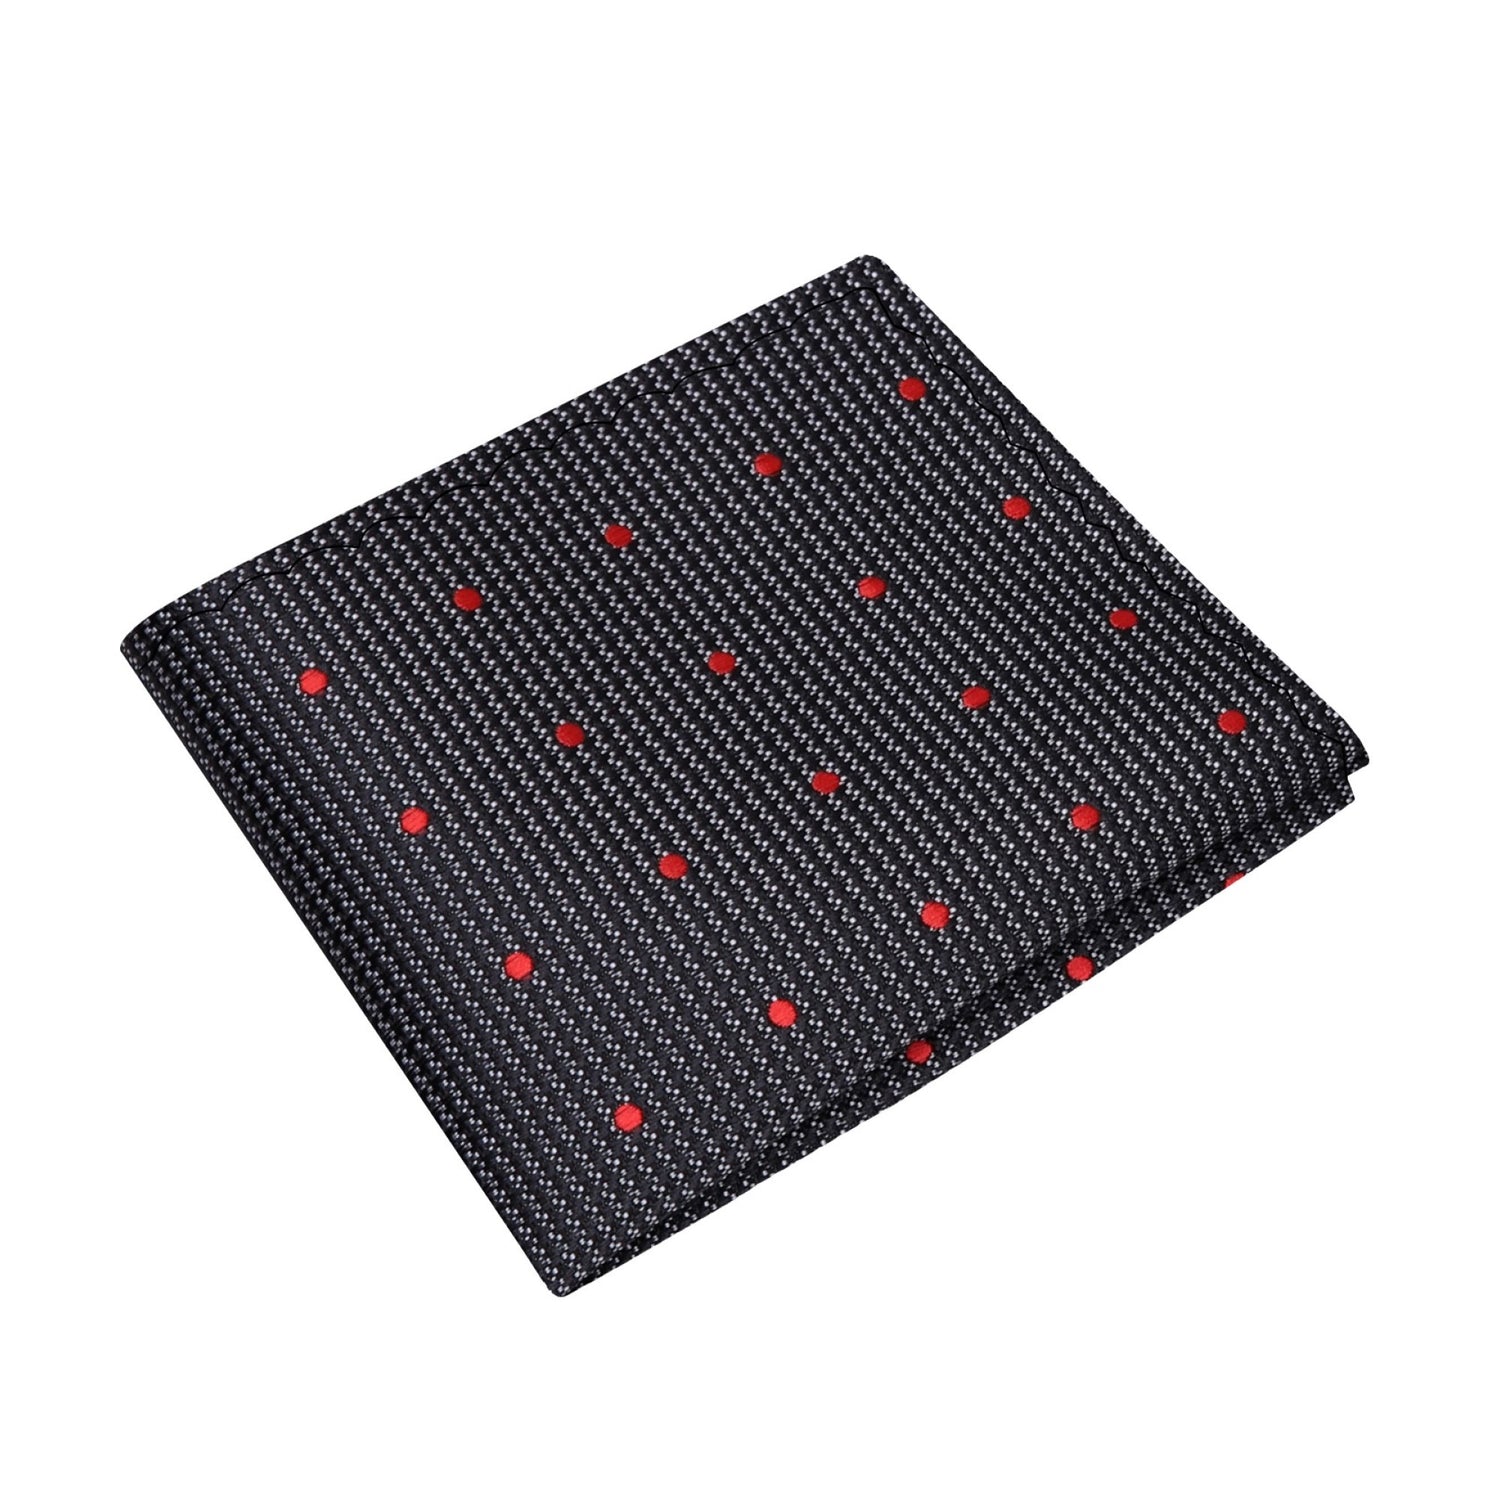 A Black with Red Polka Dot Pattern Silk Pocket Square